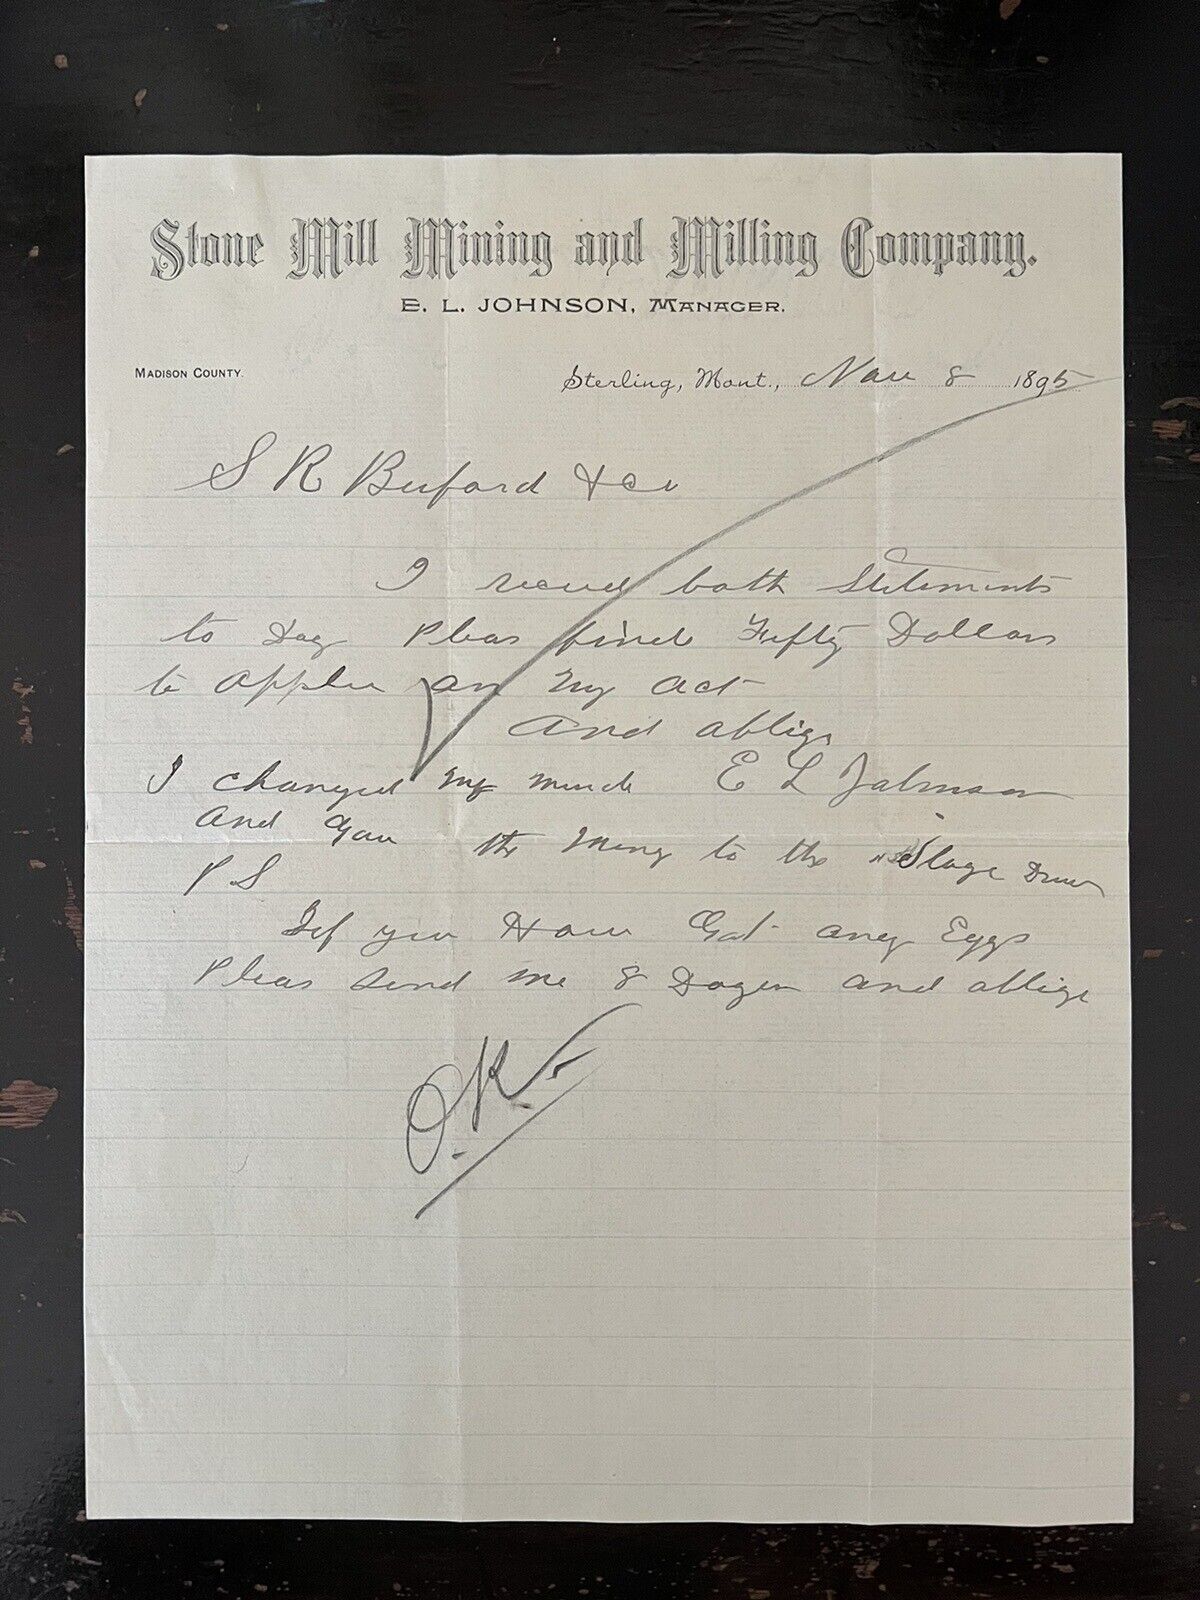 1895 Original Sterling, MT Letterhead: Stone Mill Mining and Milling Company